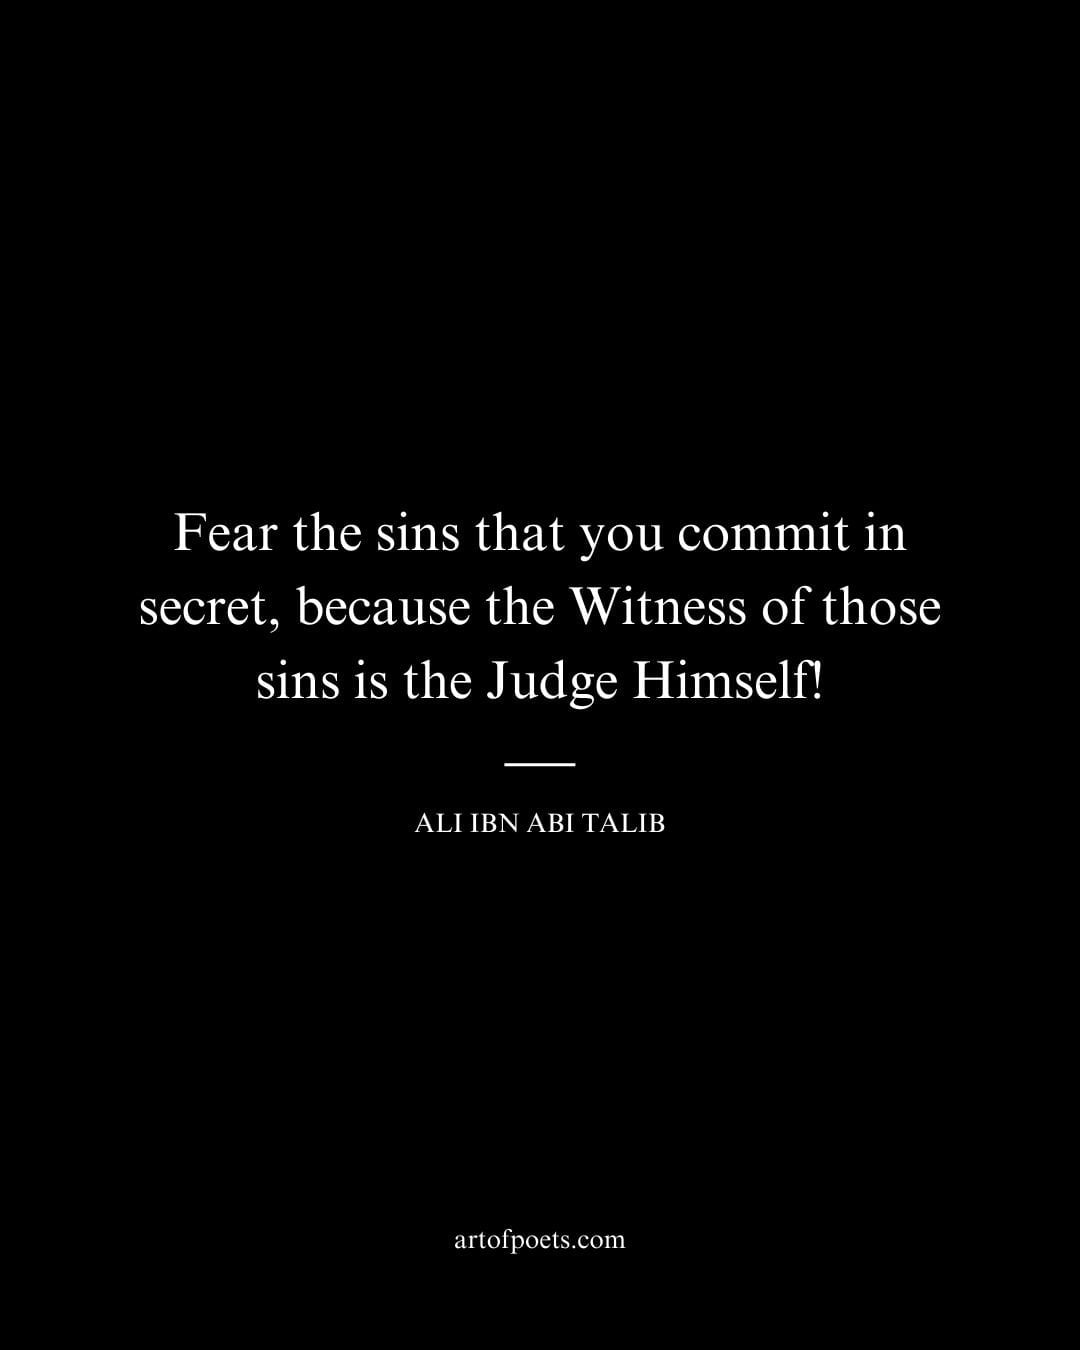 Fear the sins that you commit in secret because the Witness of those sins is the Judge Himself